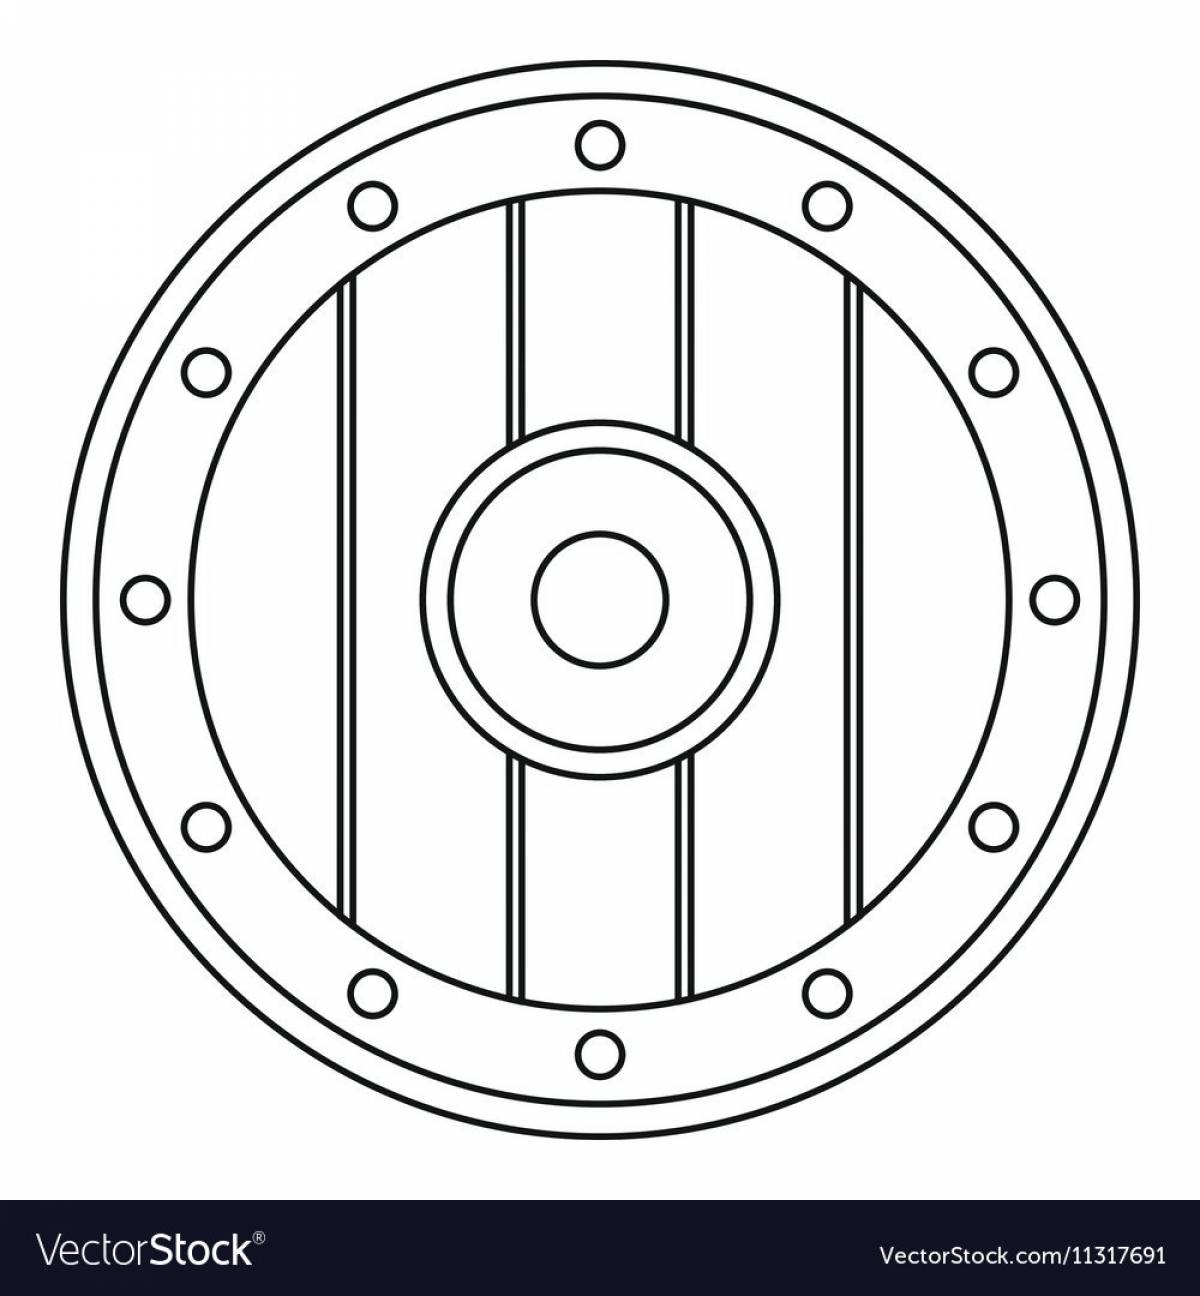 Colorful Hero Shield Coloring Page for Toddlers